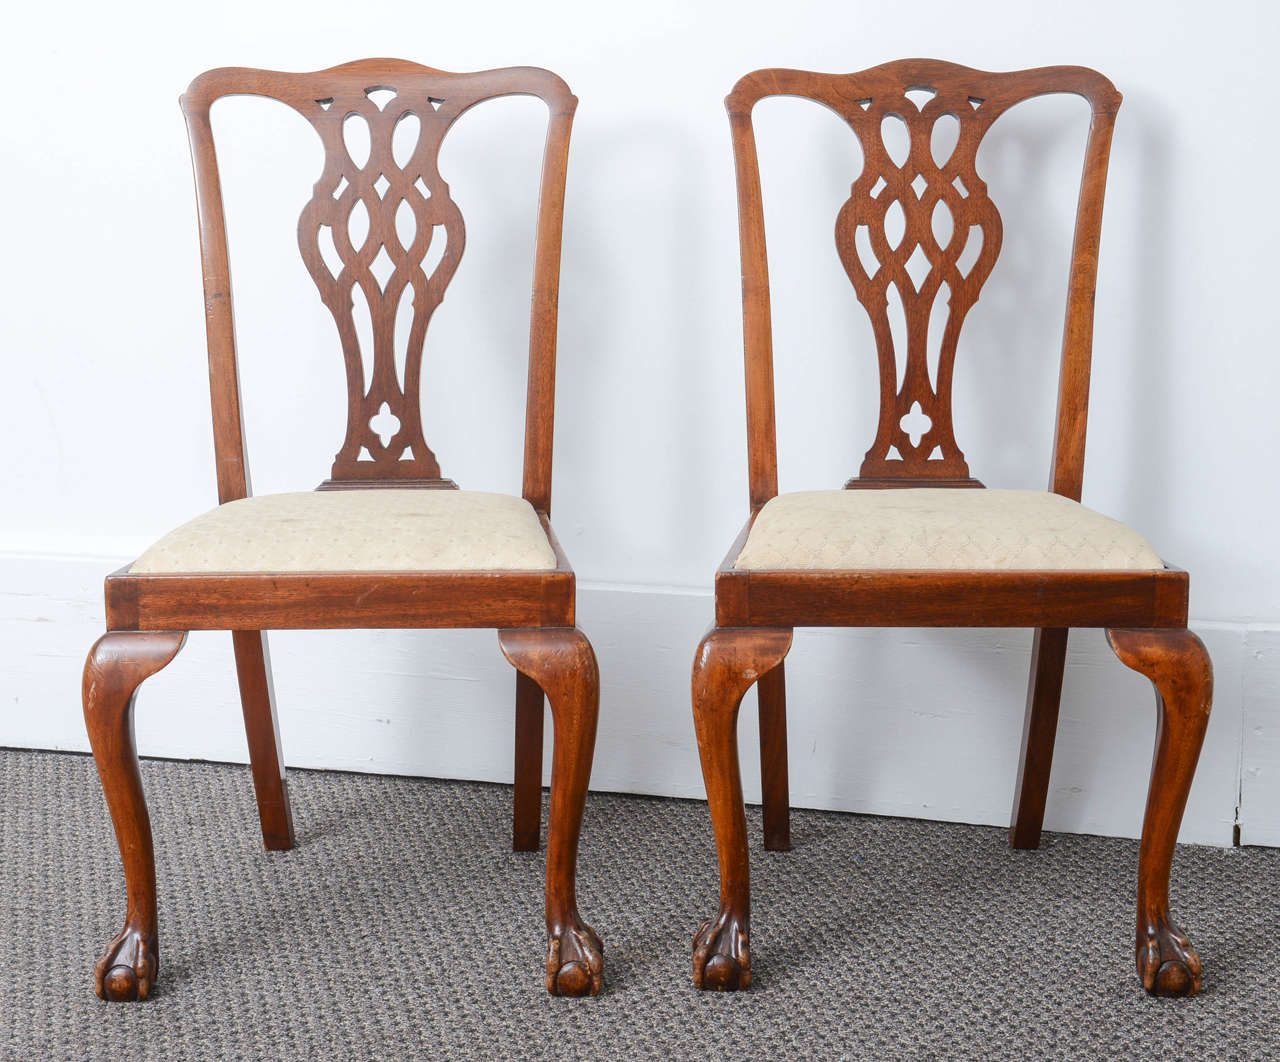 These are a very nice set of six dining chairs in mahogany. They sit on ball and claw feet they have a drop in seat and have a typical Chippendale style back. The color is a very nice brown with the original finish, and they are very sturdy.